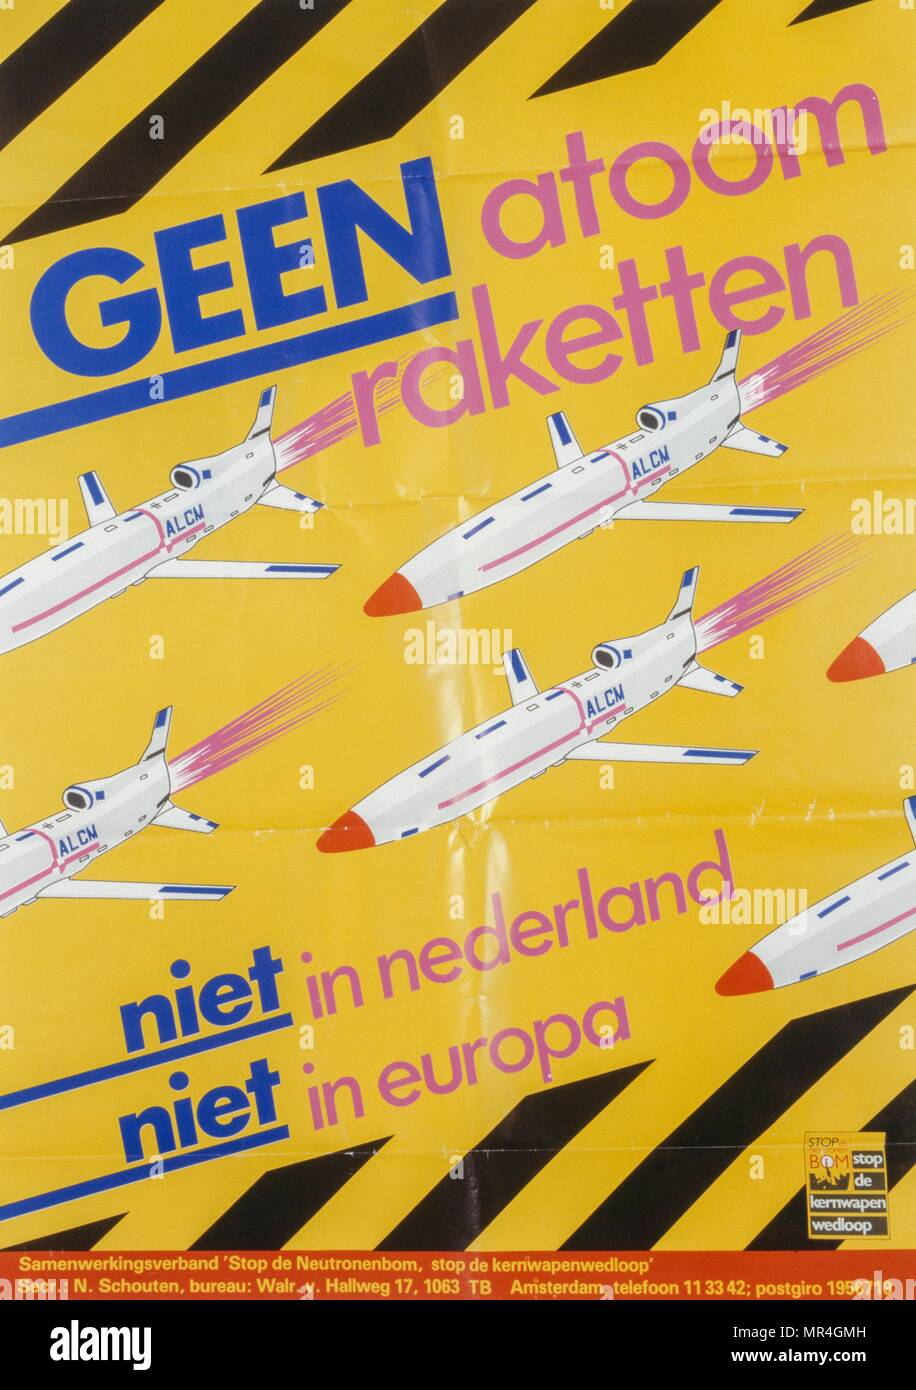 Dutch anti-nuclear weapons peace poster 1981, produced during the Cold War Stock Photo